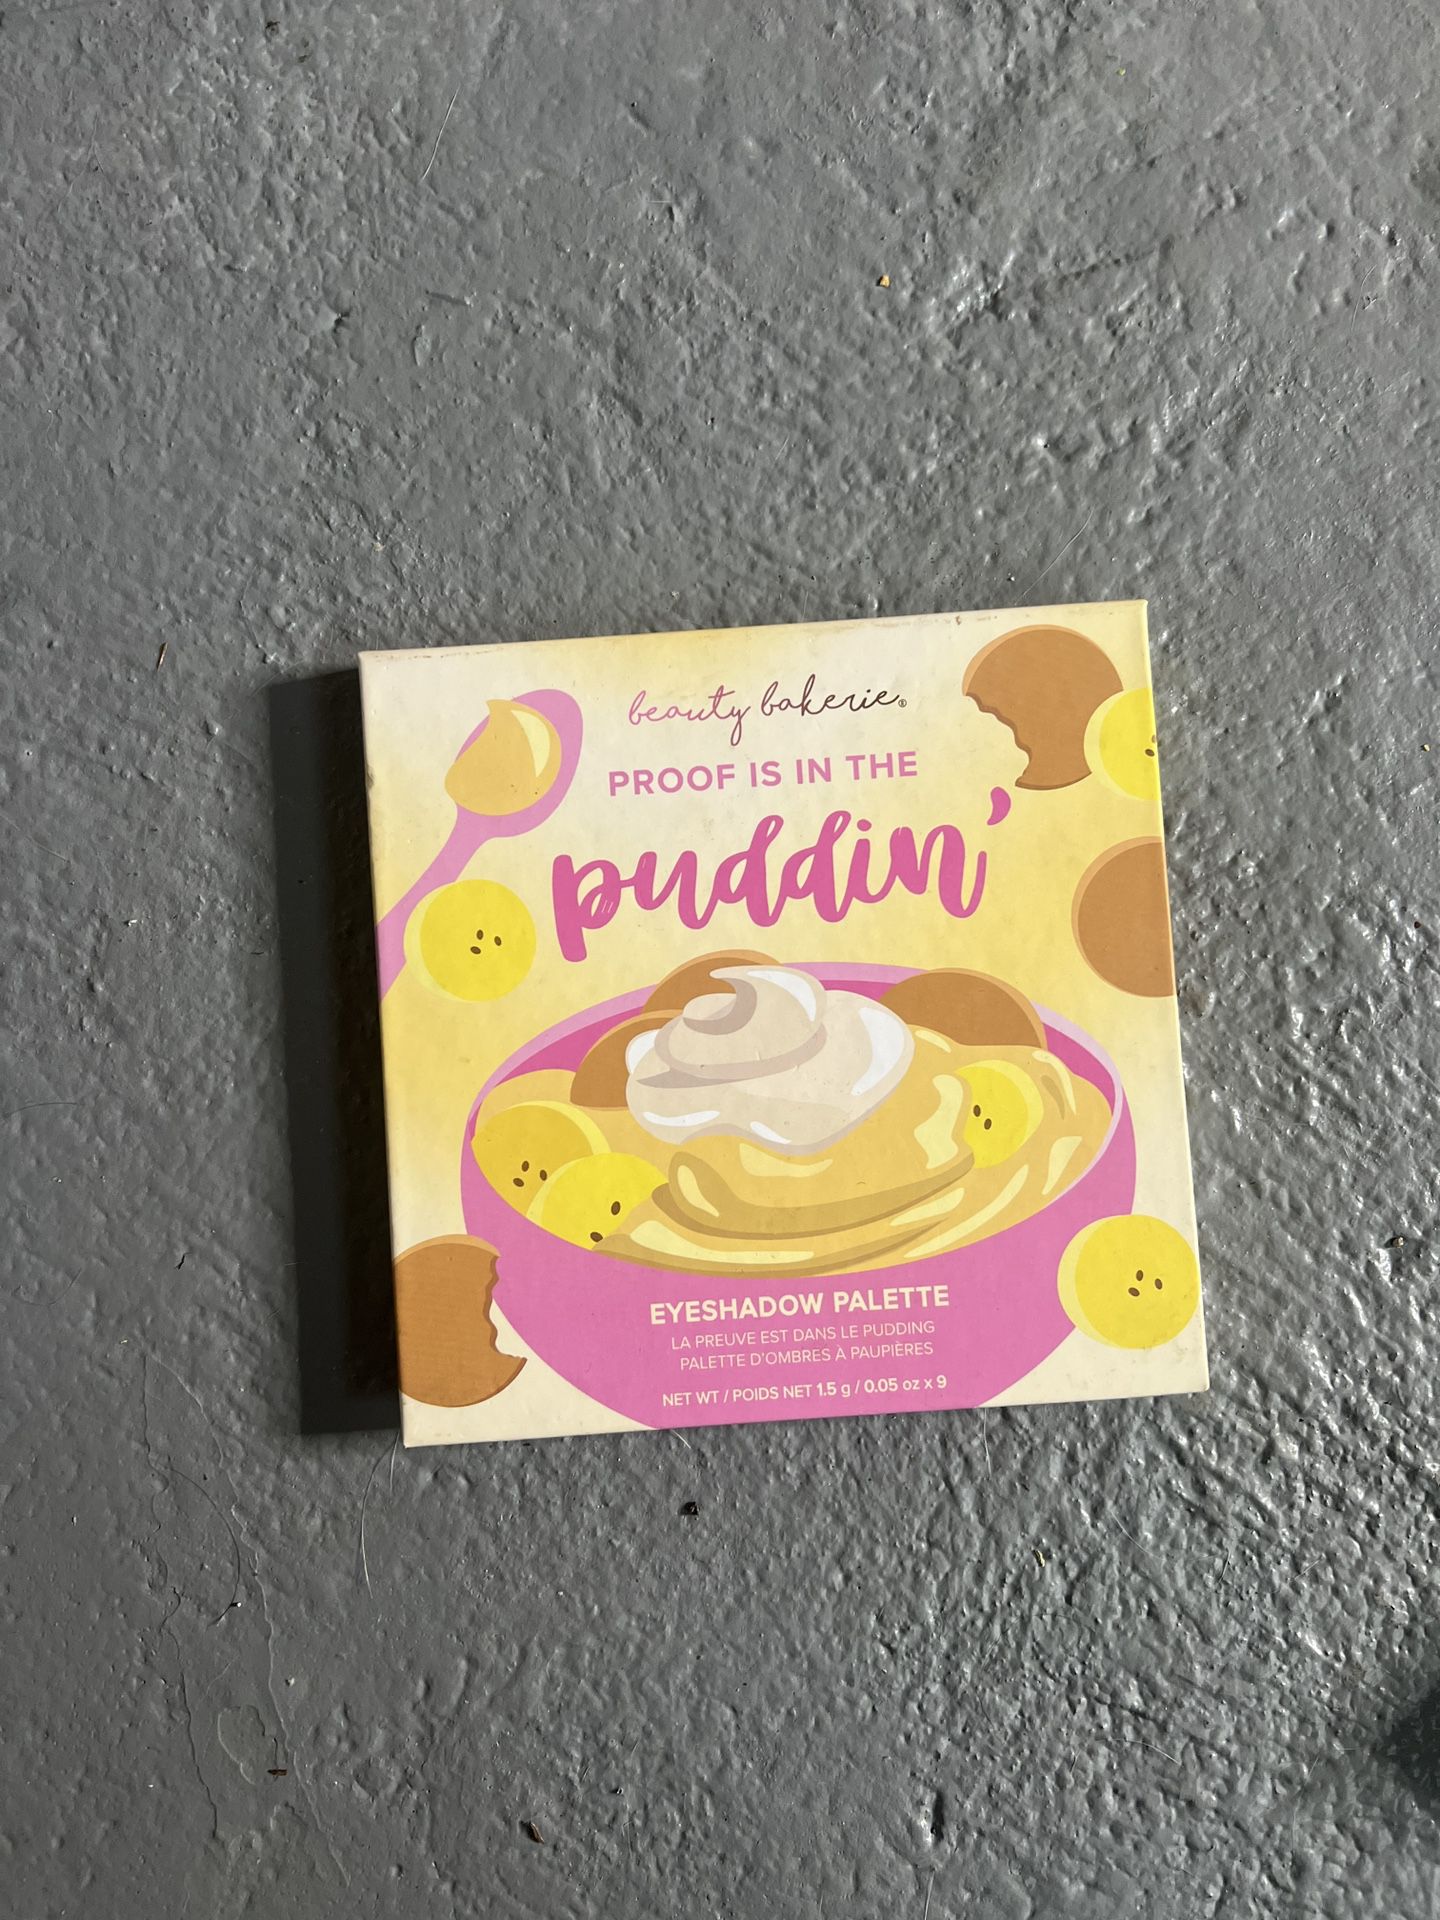 Brand new PROOF IS IN THE PUDDIN’ eyeshadow palette